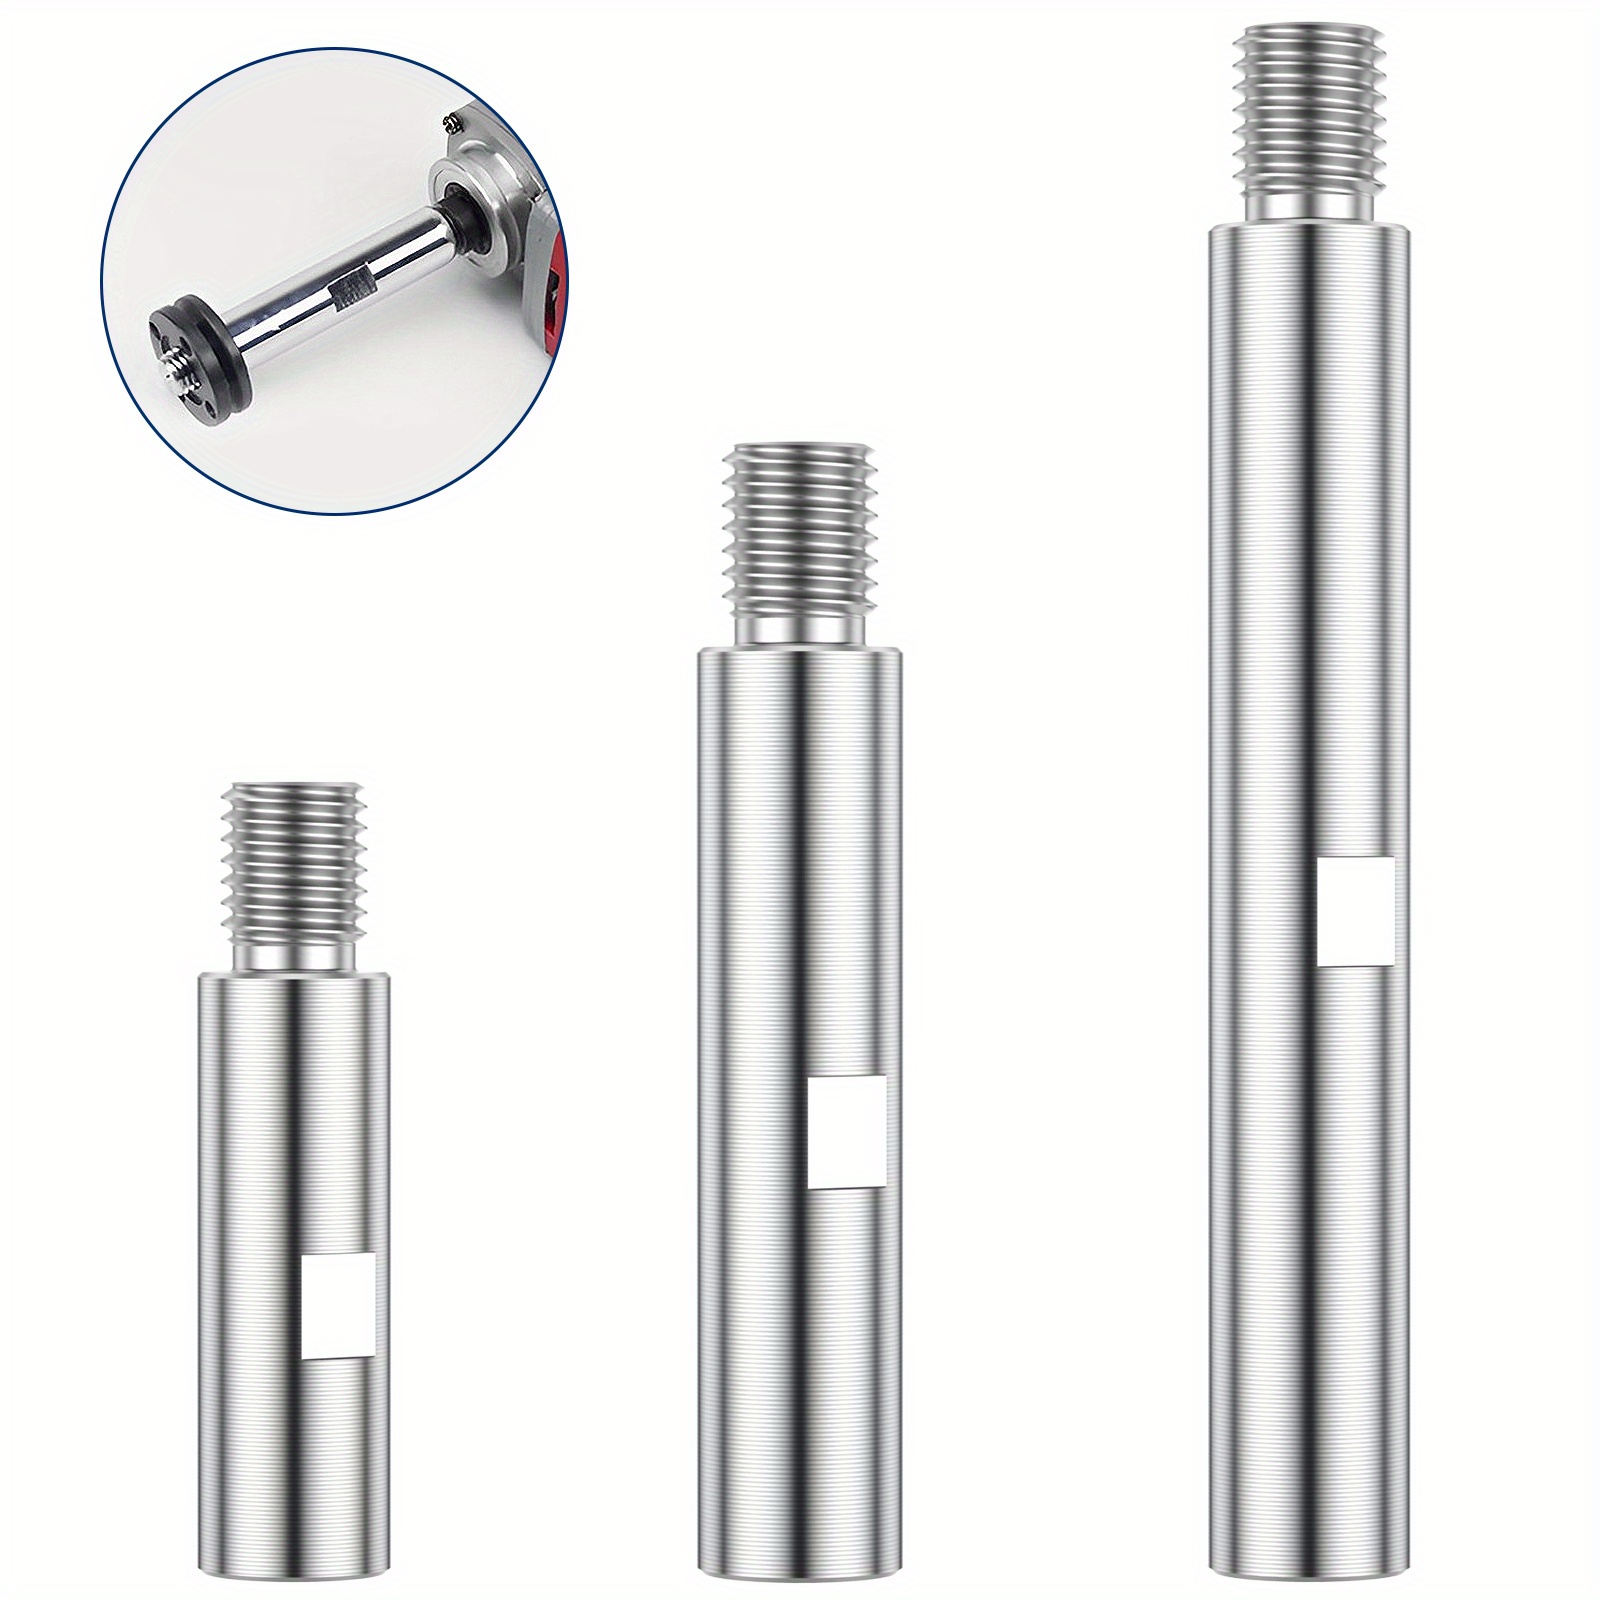 

3pcs Grinder Extension Rod 3/4/5.5 Inch M14 Grinder Extension Shaft Aluminium Alloy Rotary Grinder Lengthen Connecting Rod For Polisher Grinding Machine